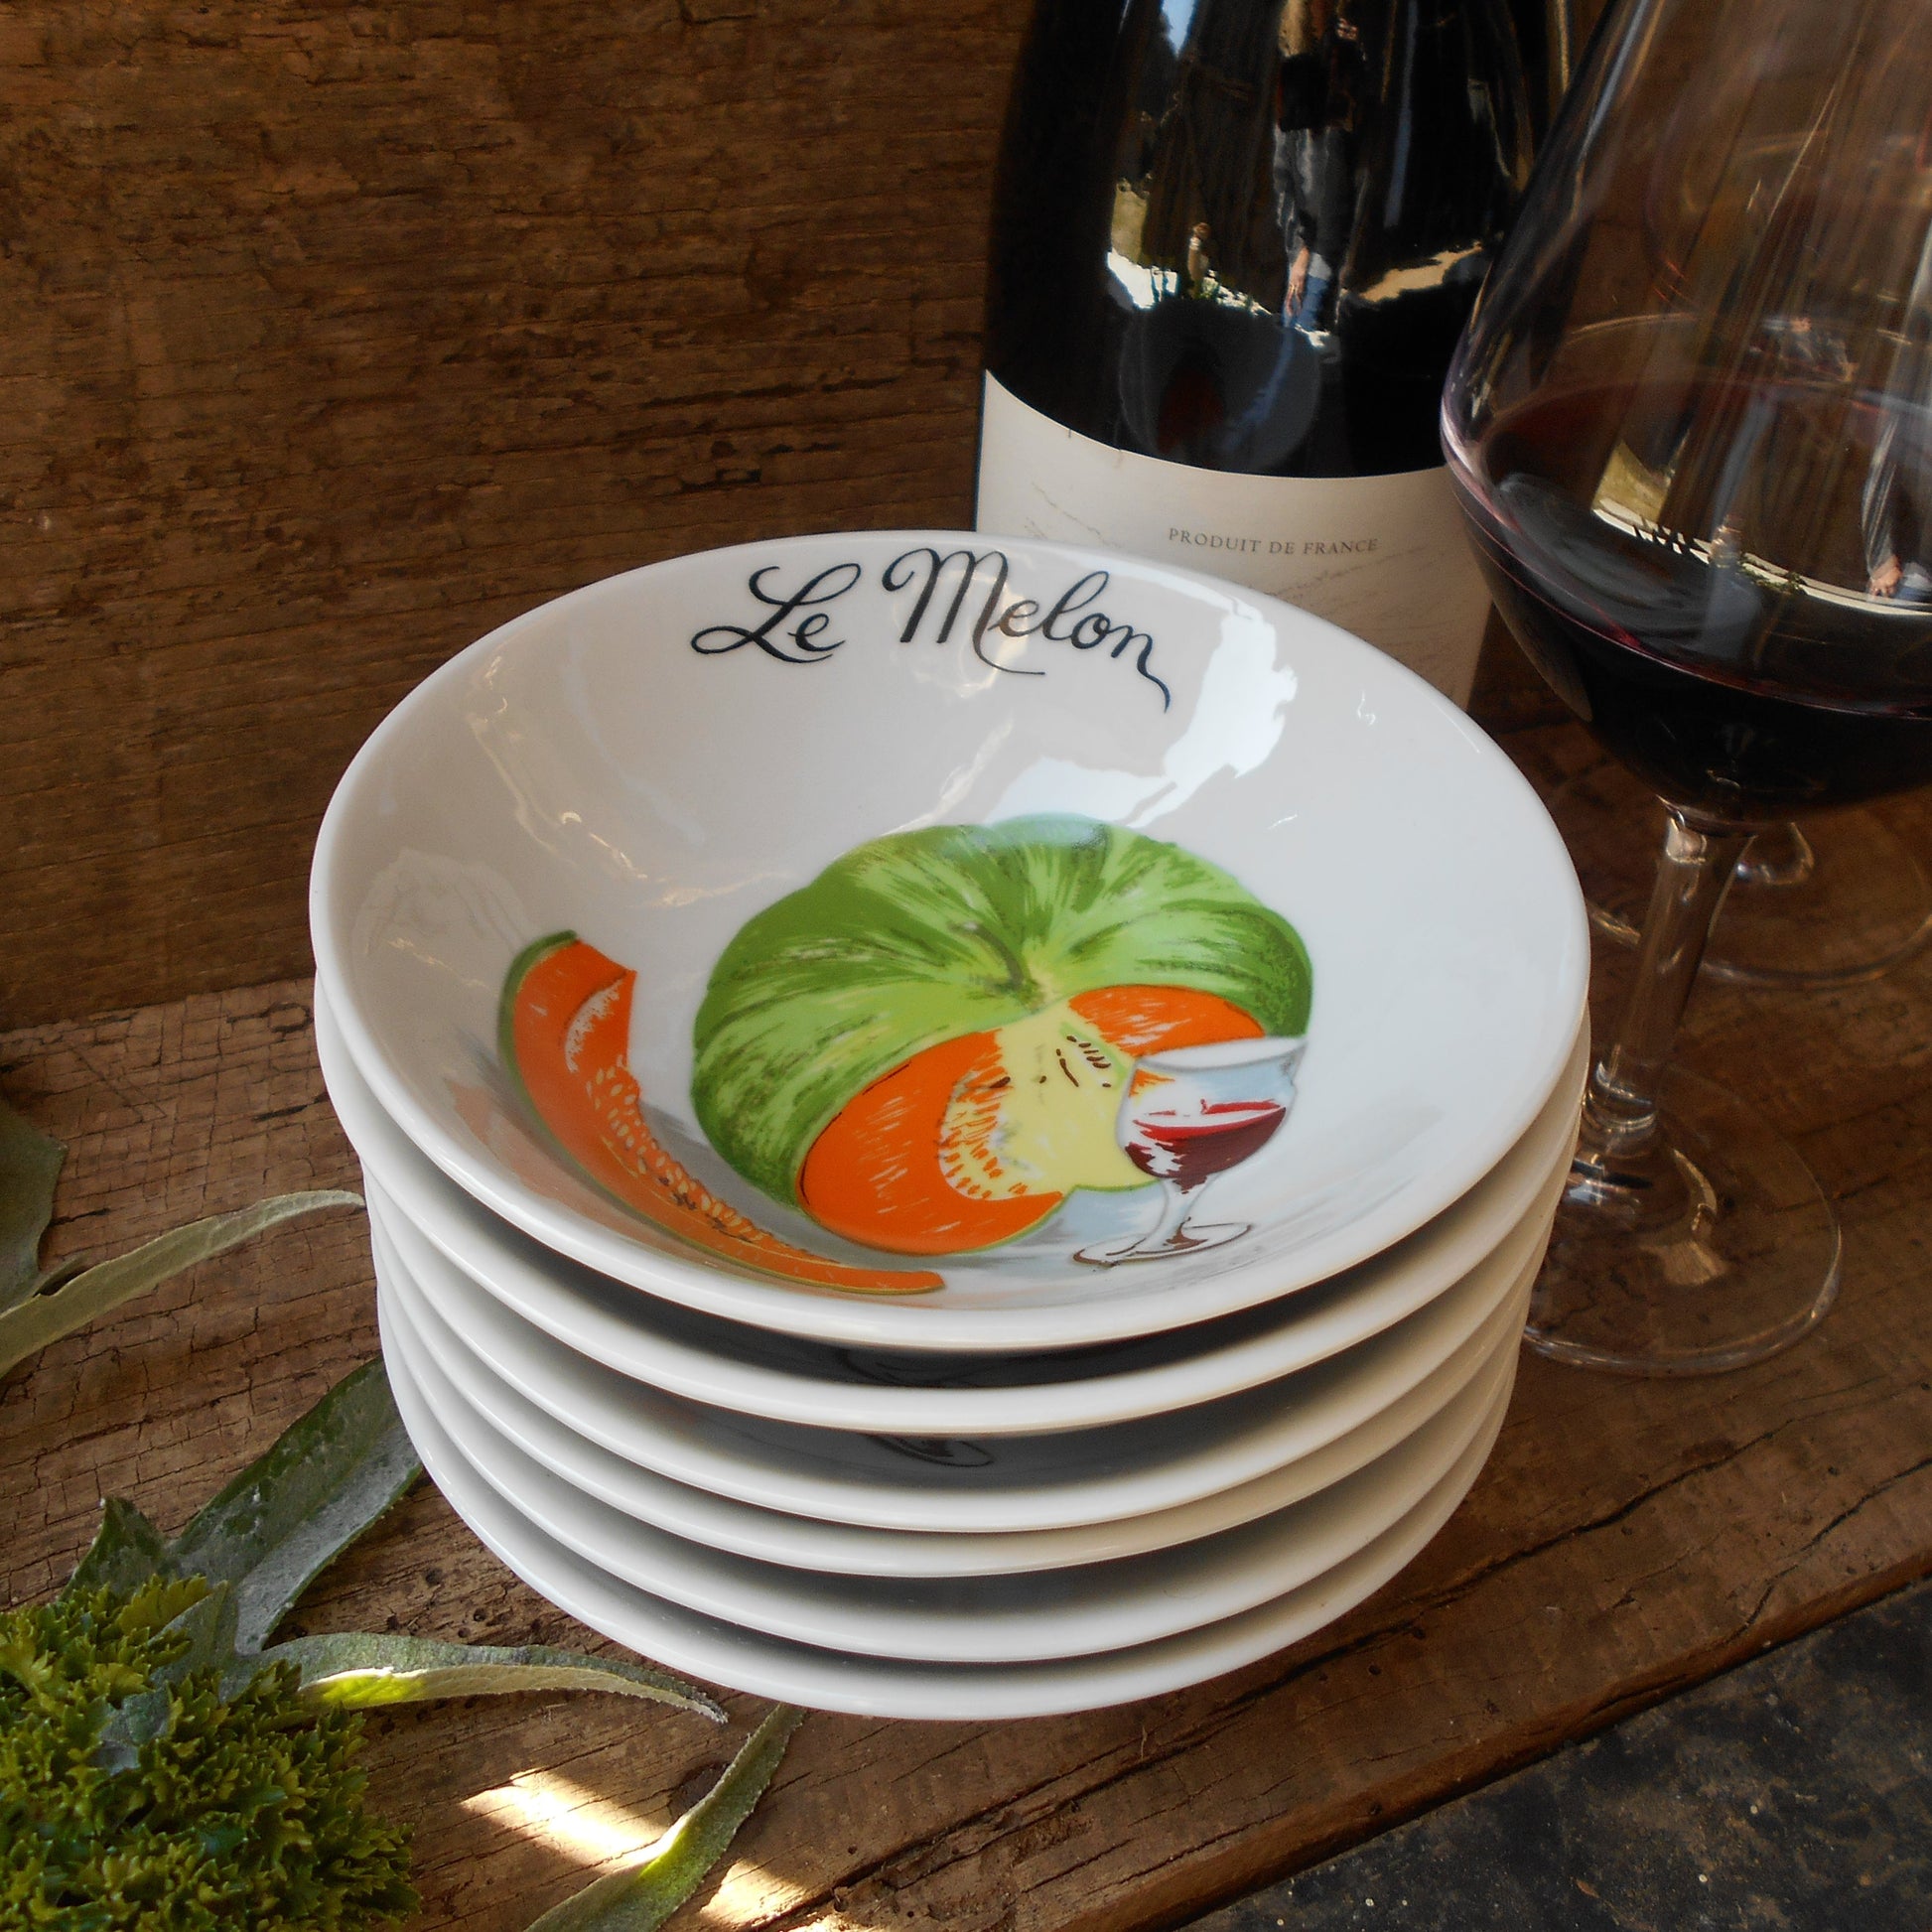 Melon Dishes. Set of Six, French, Mid-Century 'Le Melon' Bowls. from Tiggy & Pip - €96.00! Shop now at Tiggy and Pip